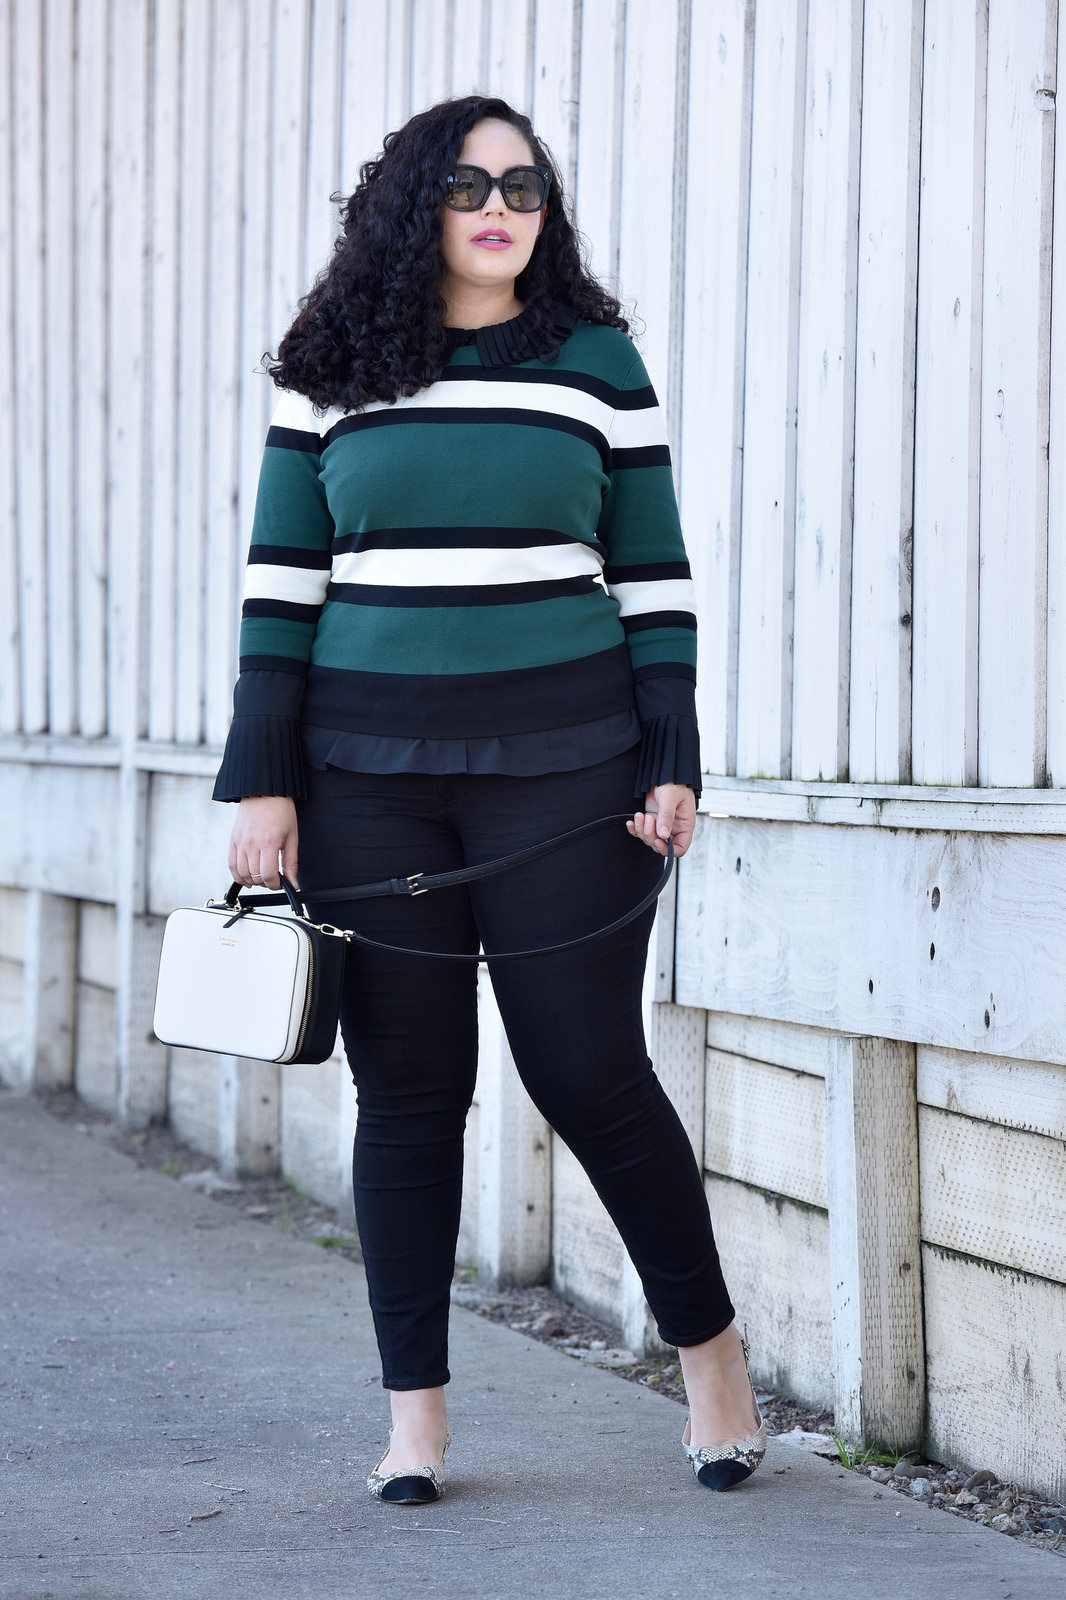 Sweater from Asos, Top from Eloquii, Pants from Old Navy, Bag from Kate Spade, Shoes from J Crew, Sunglasses from Celine, Lipstick from Mac Fan Fare Via @GirlWithCurves